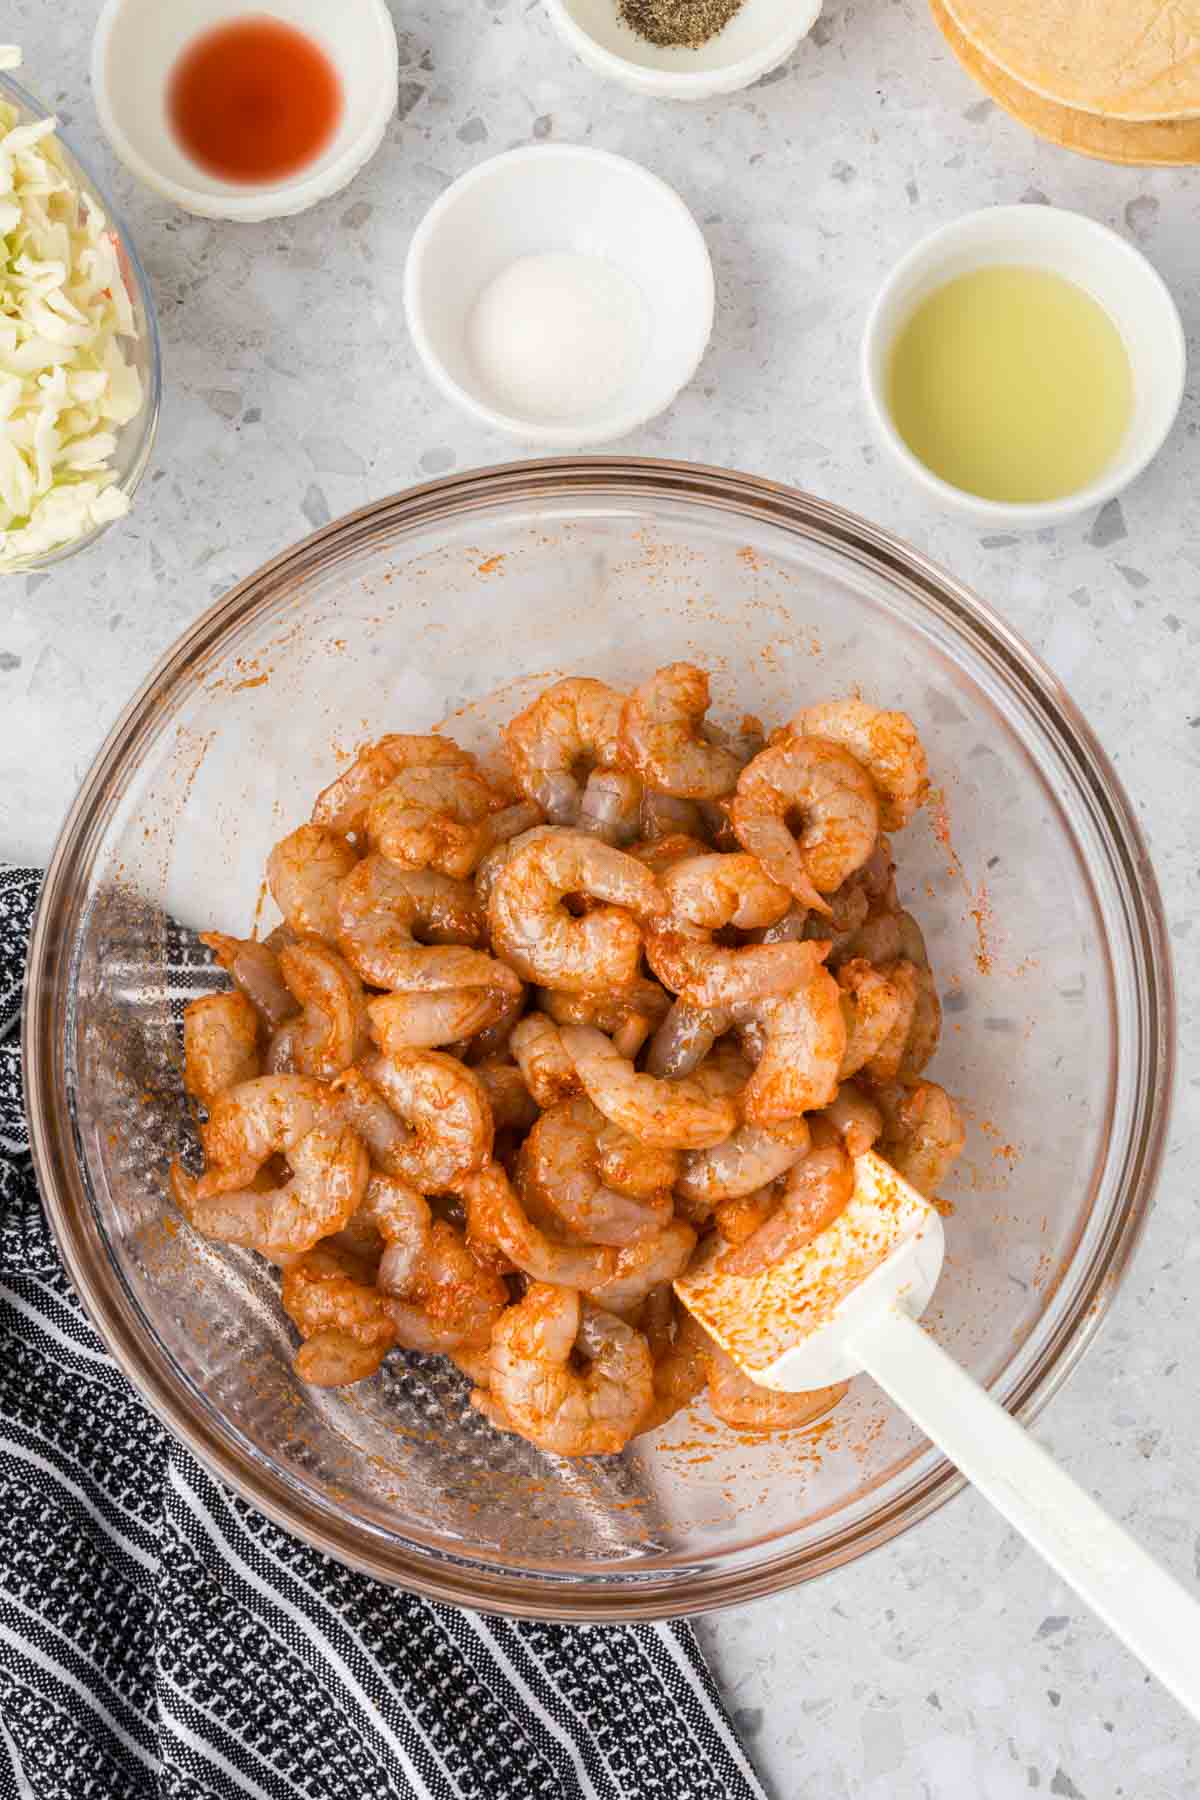 Combining the shrimp with the seasoning and oil in a bowl with a spatula